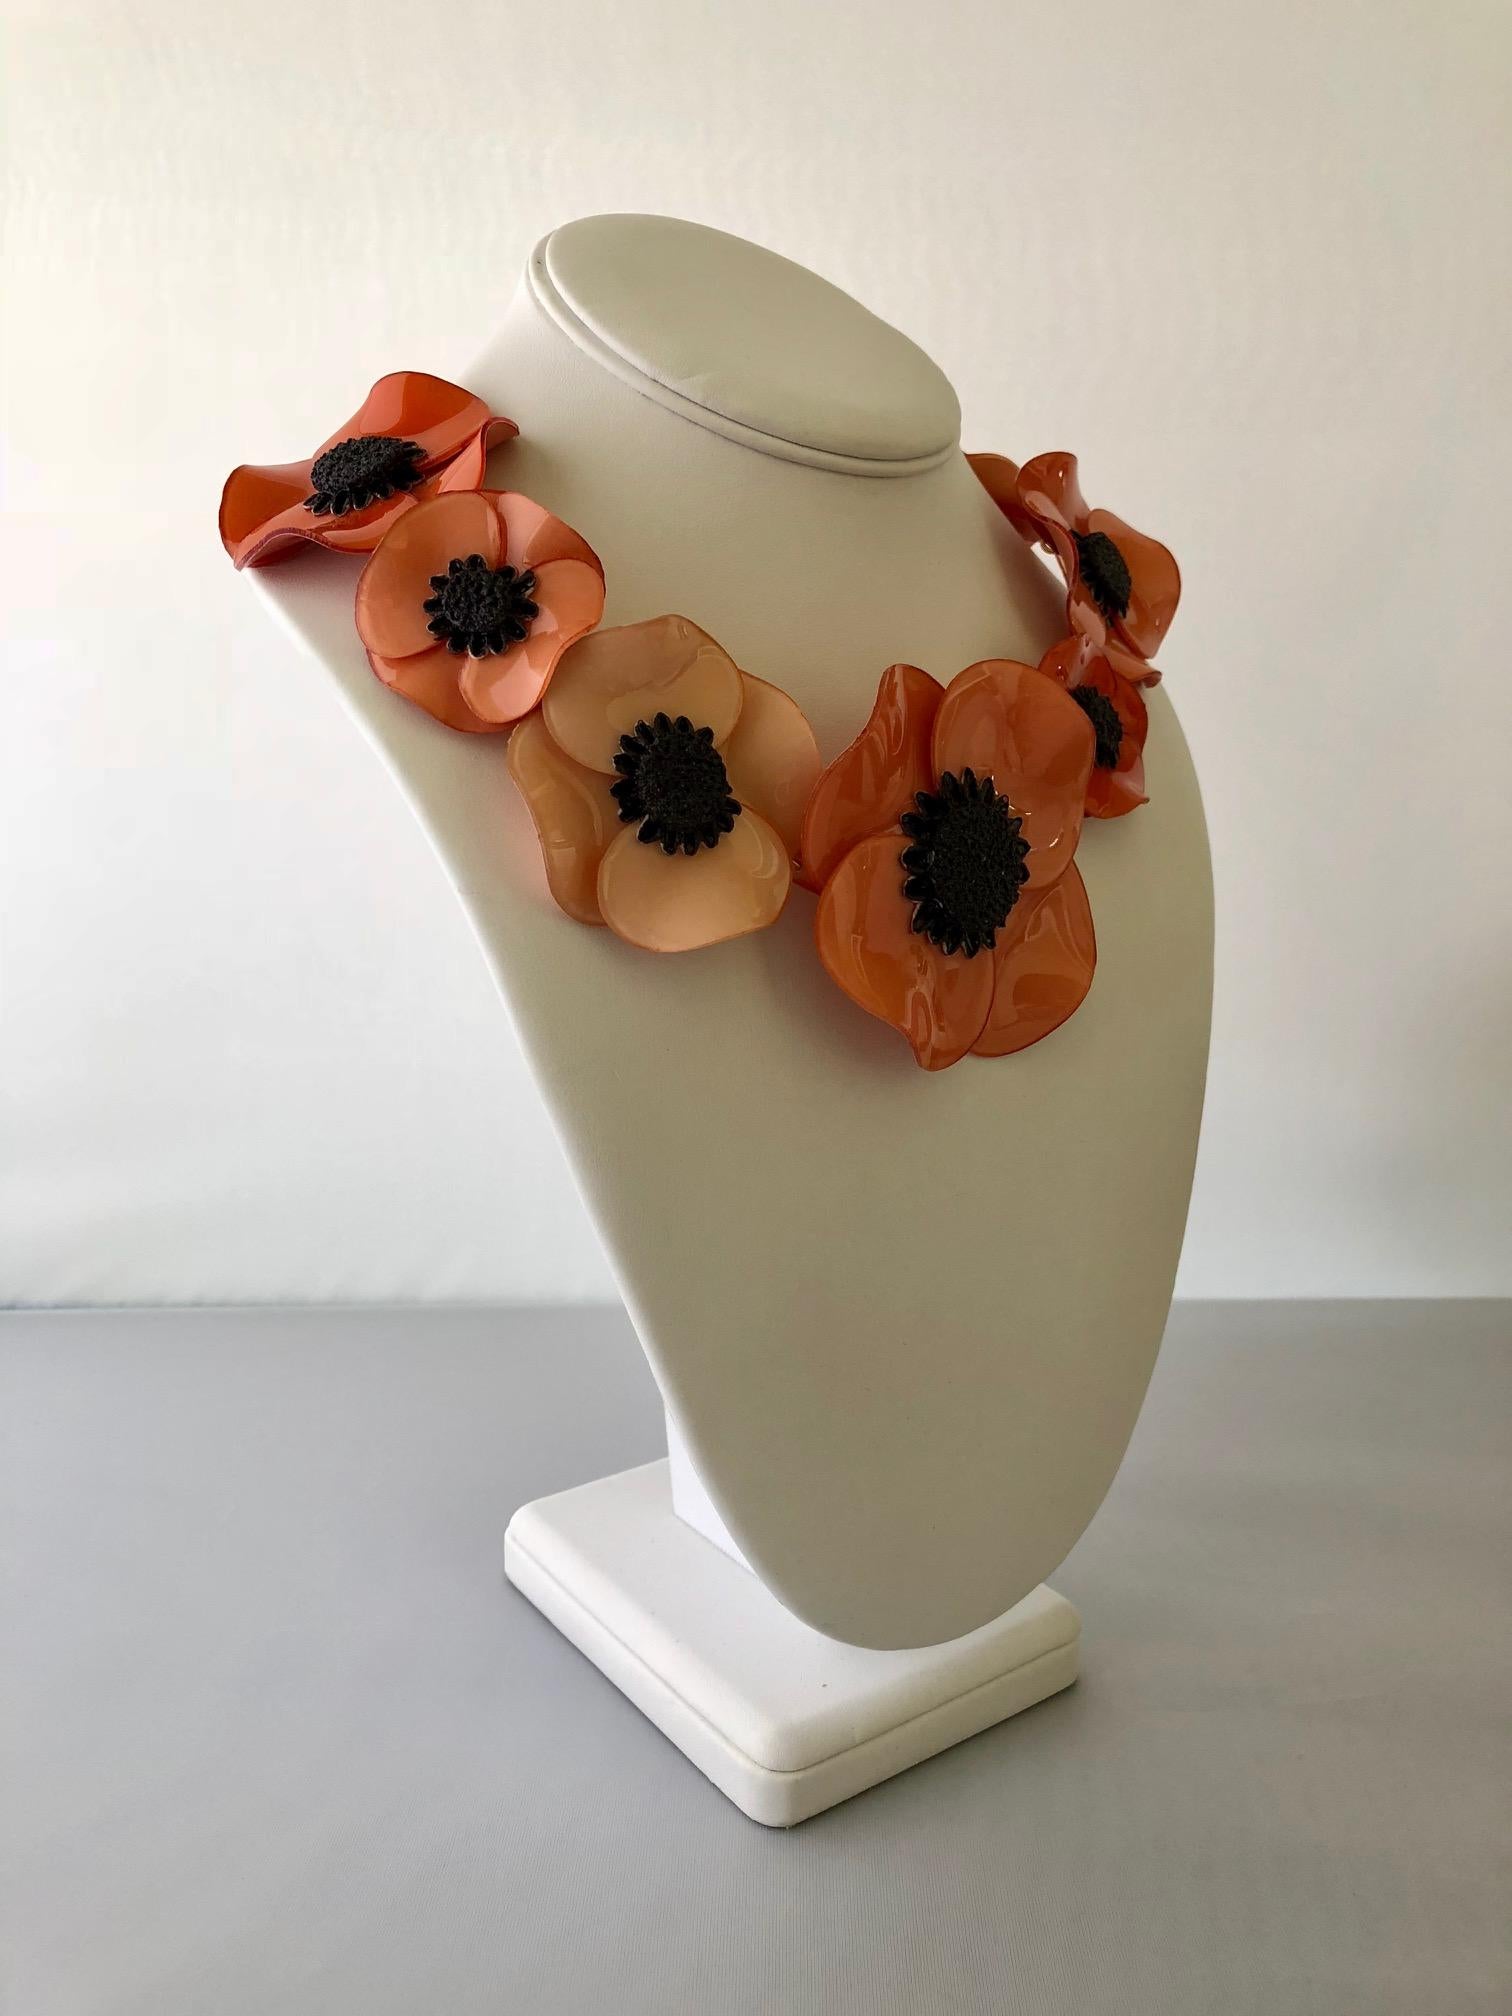 Light and easy to wear, this handmade adjustable artisanal necklace was made in Paris by Cilea.  The necklace features seven architectural enameline (enamel and resin composite) poppy flowers in different shades of pink and coral. The poppies are